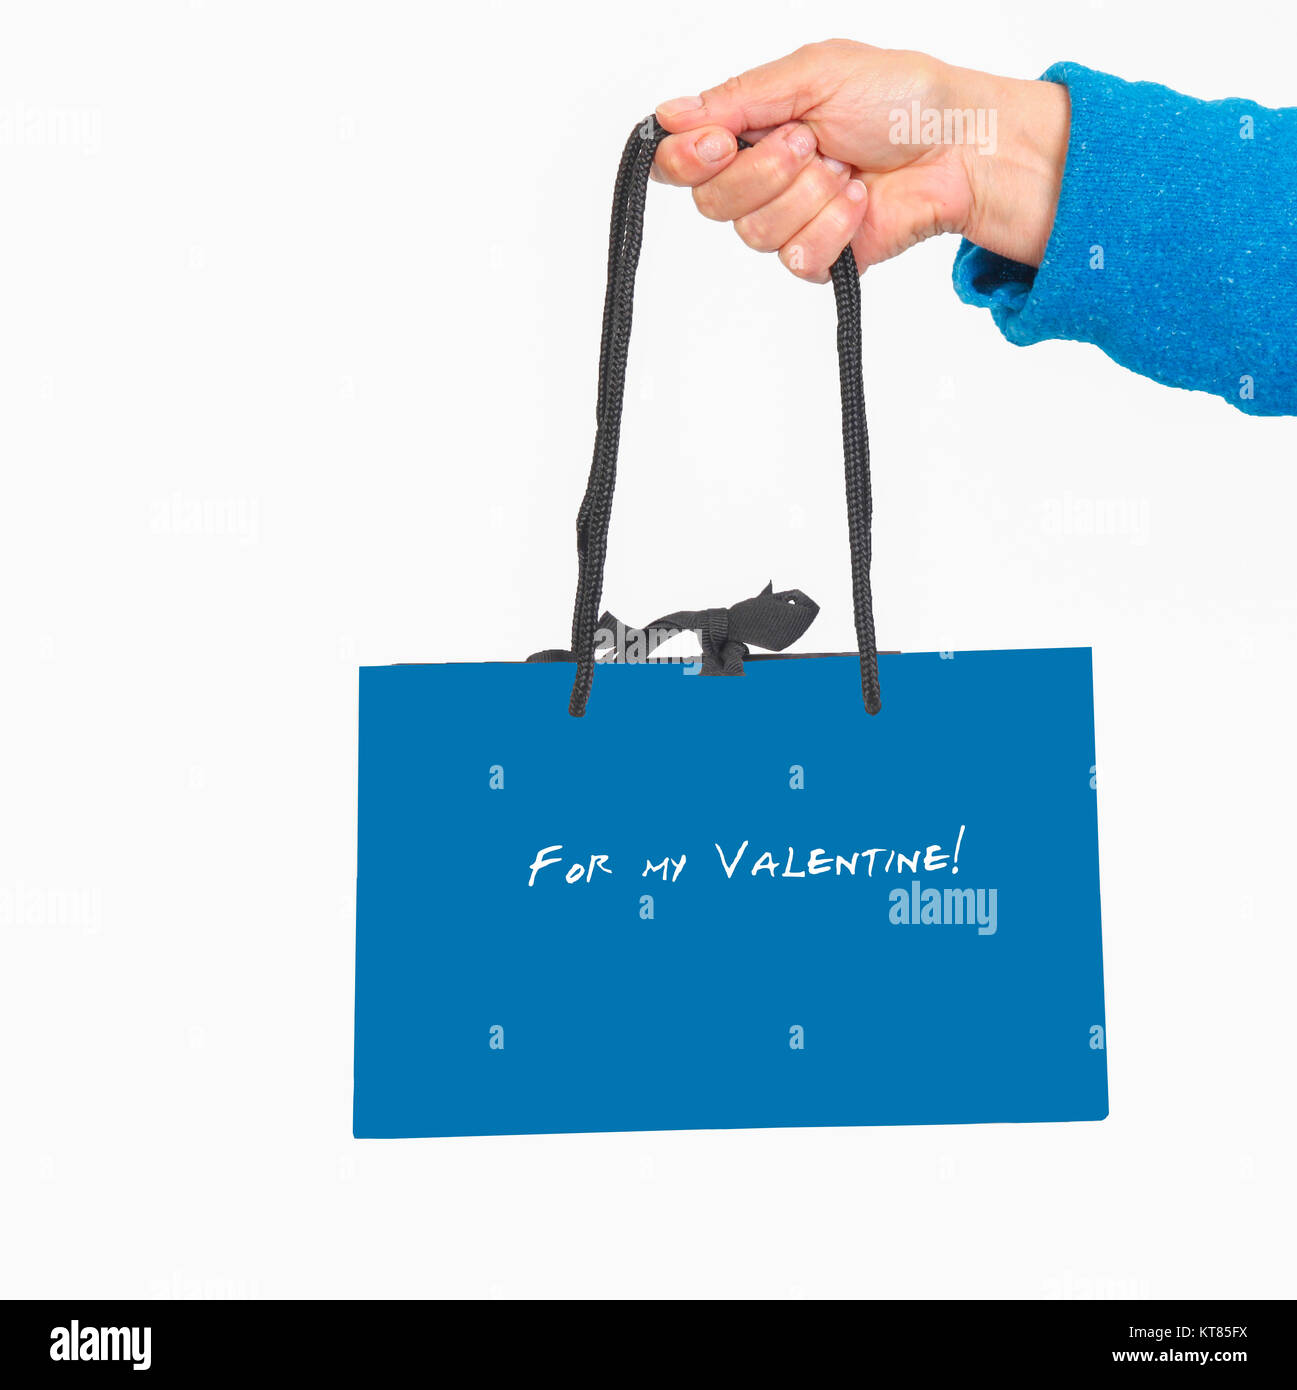 Hand in blue sweater holding blue bag with Valentine text Stock Photo